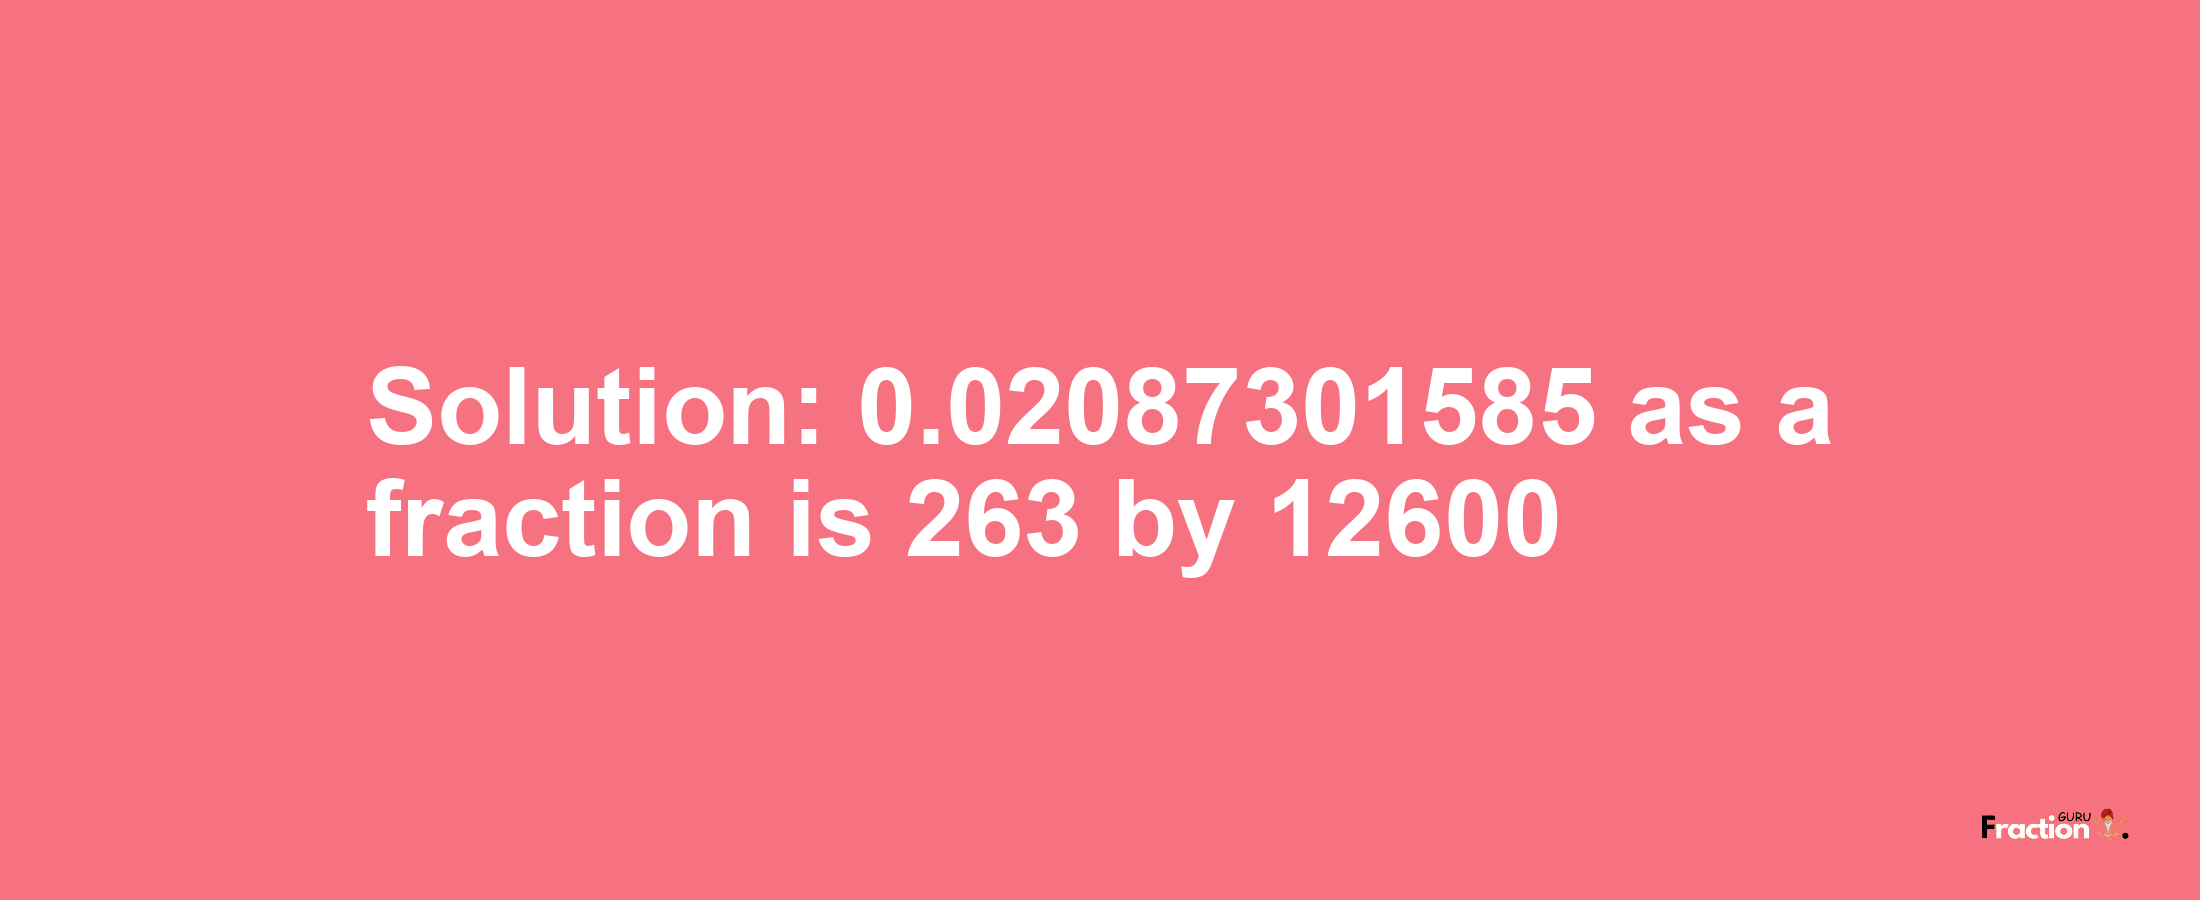 Solution:0.02087301585 as a fraction is 263/12600